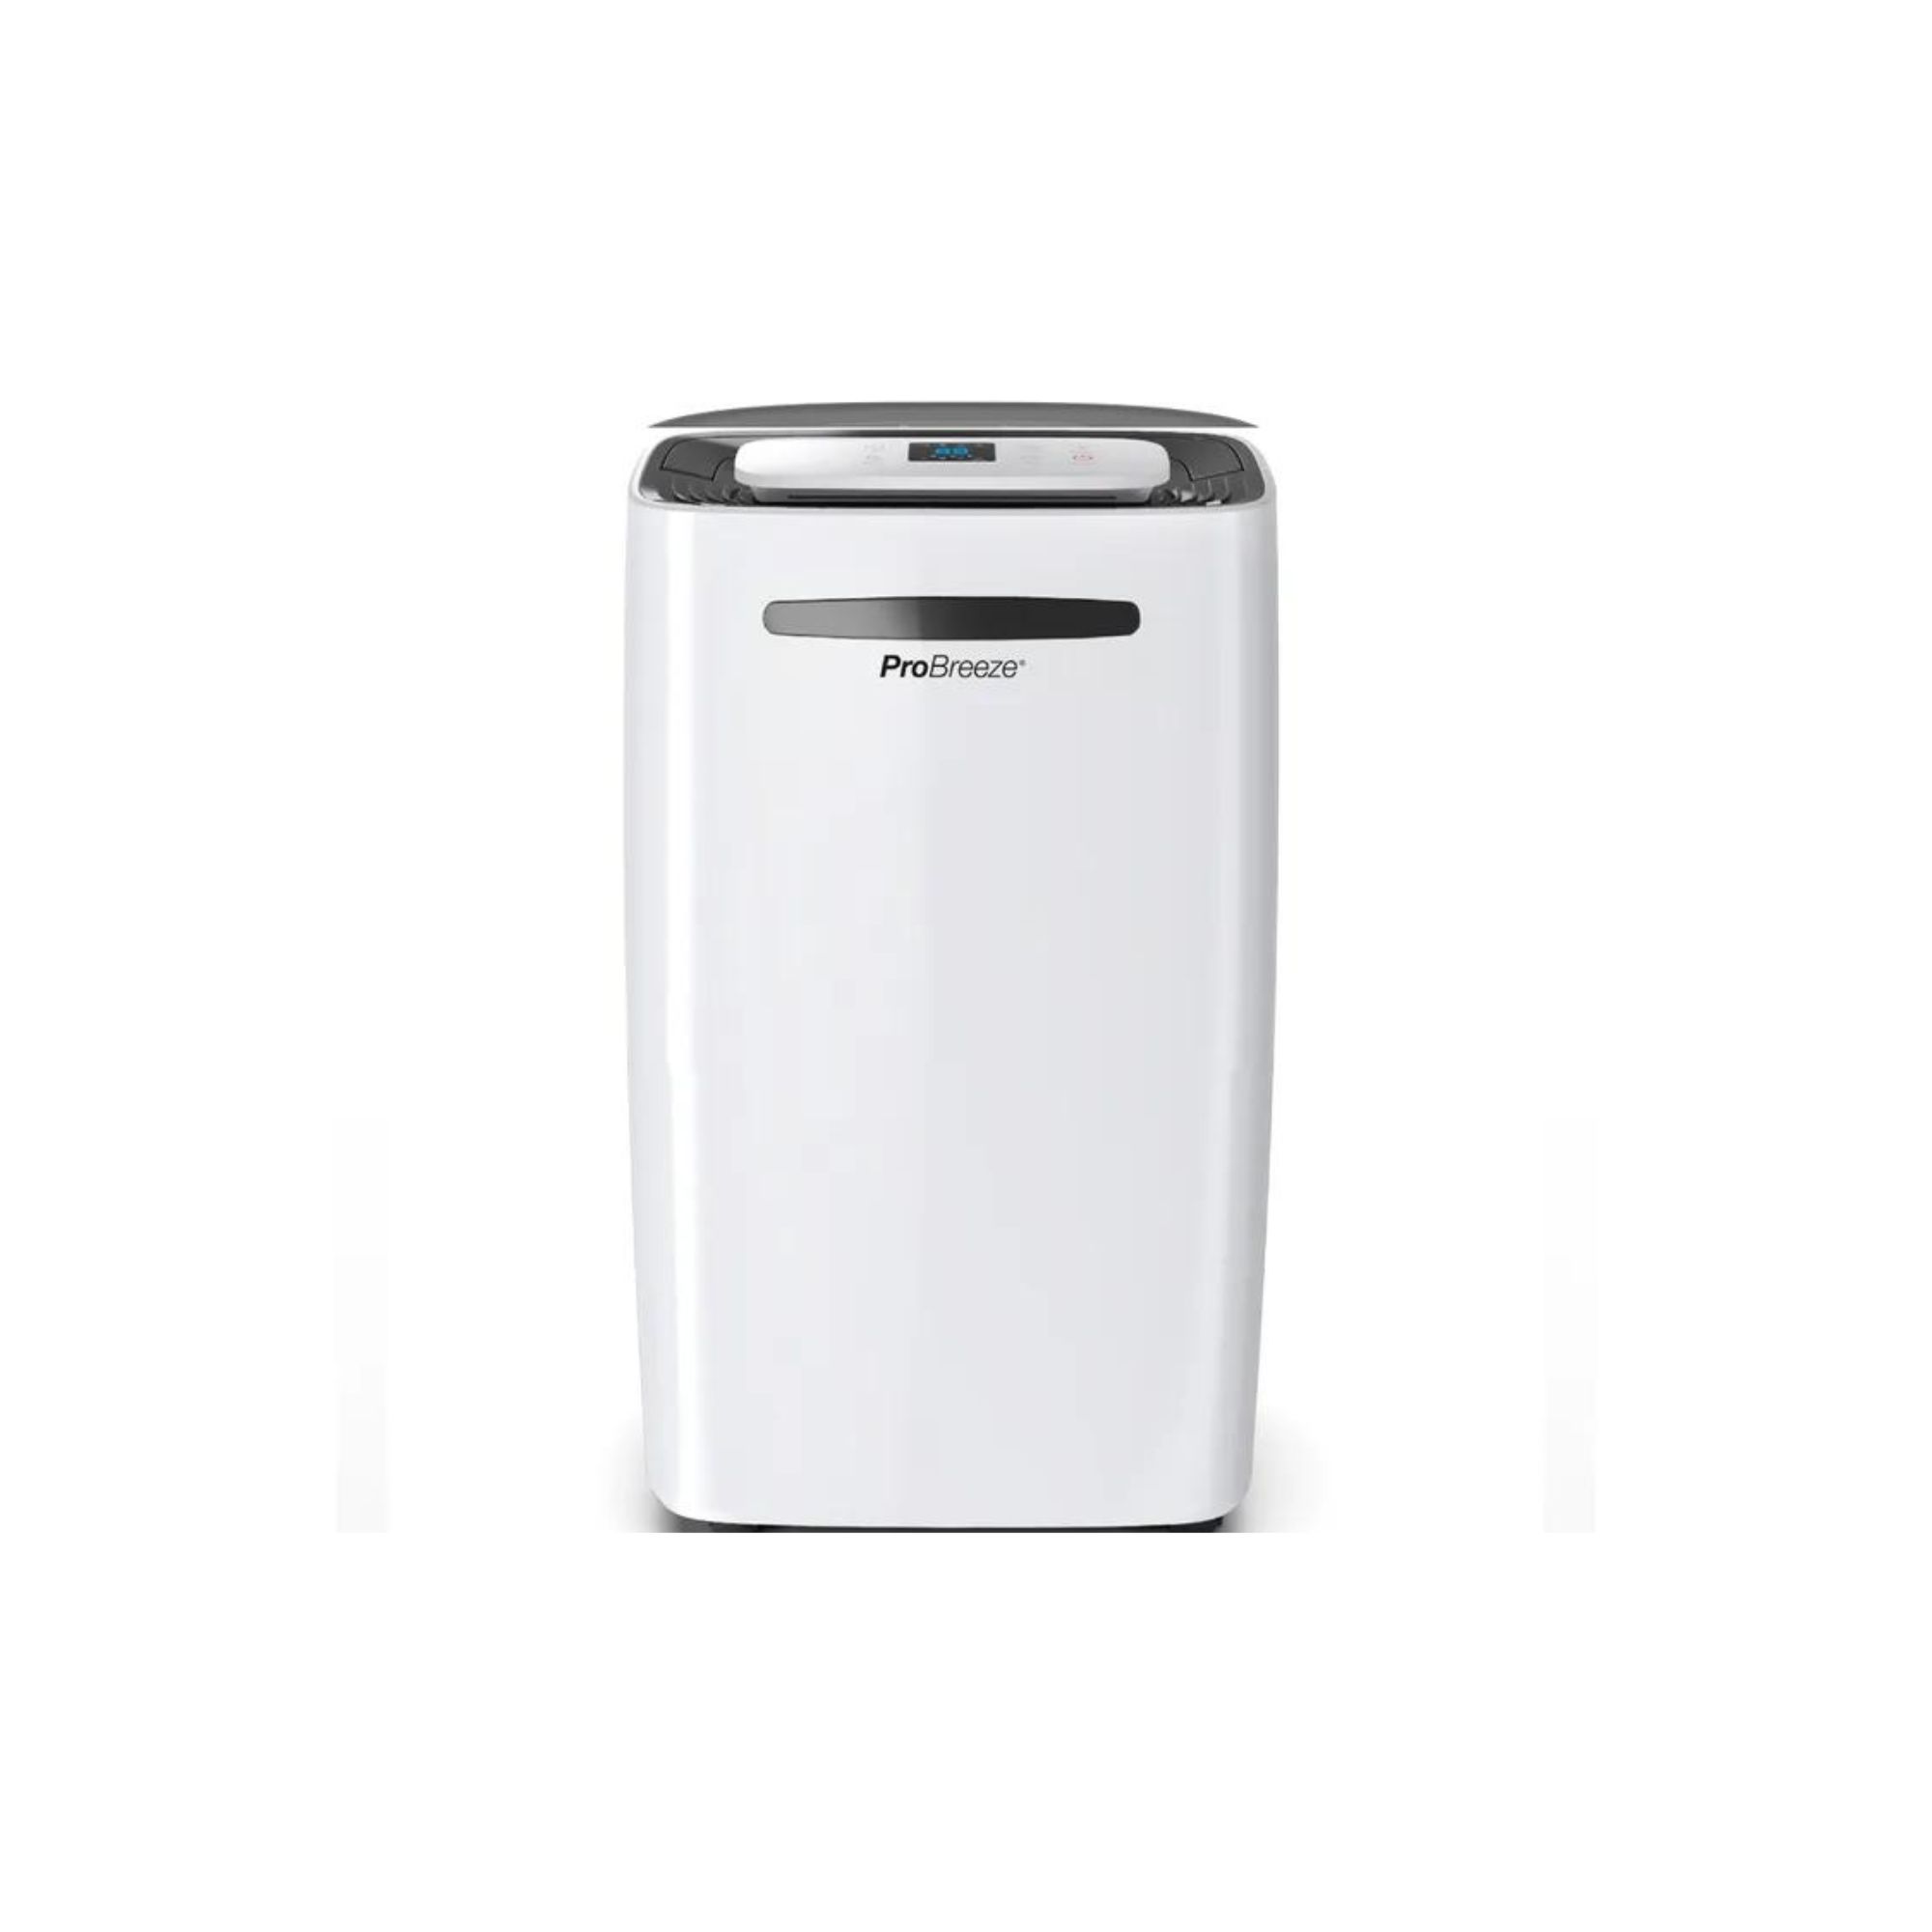 The ProBreeze 20L Dehumidifier is the best dehumidifier for dampness.